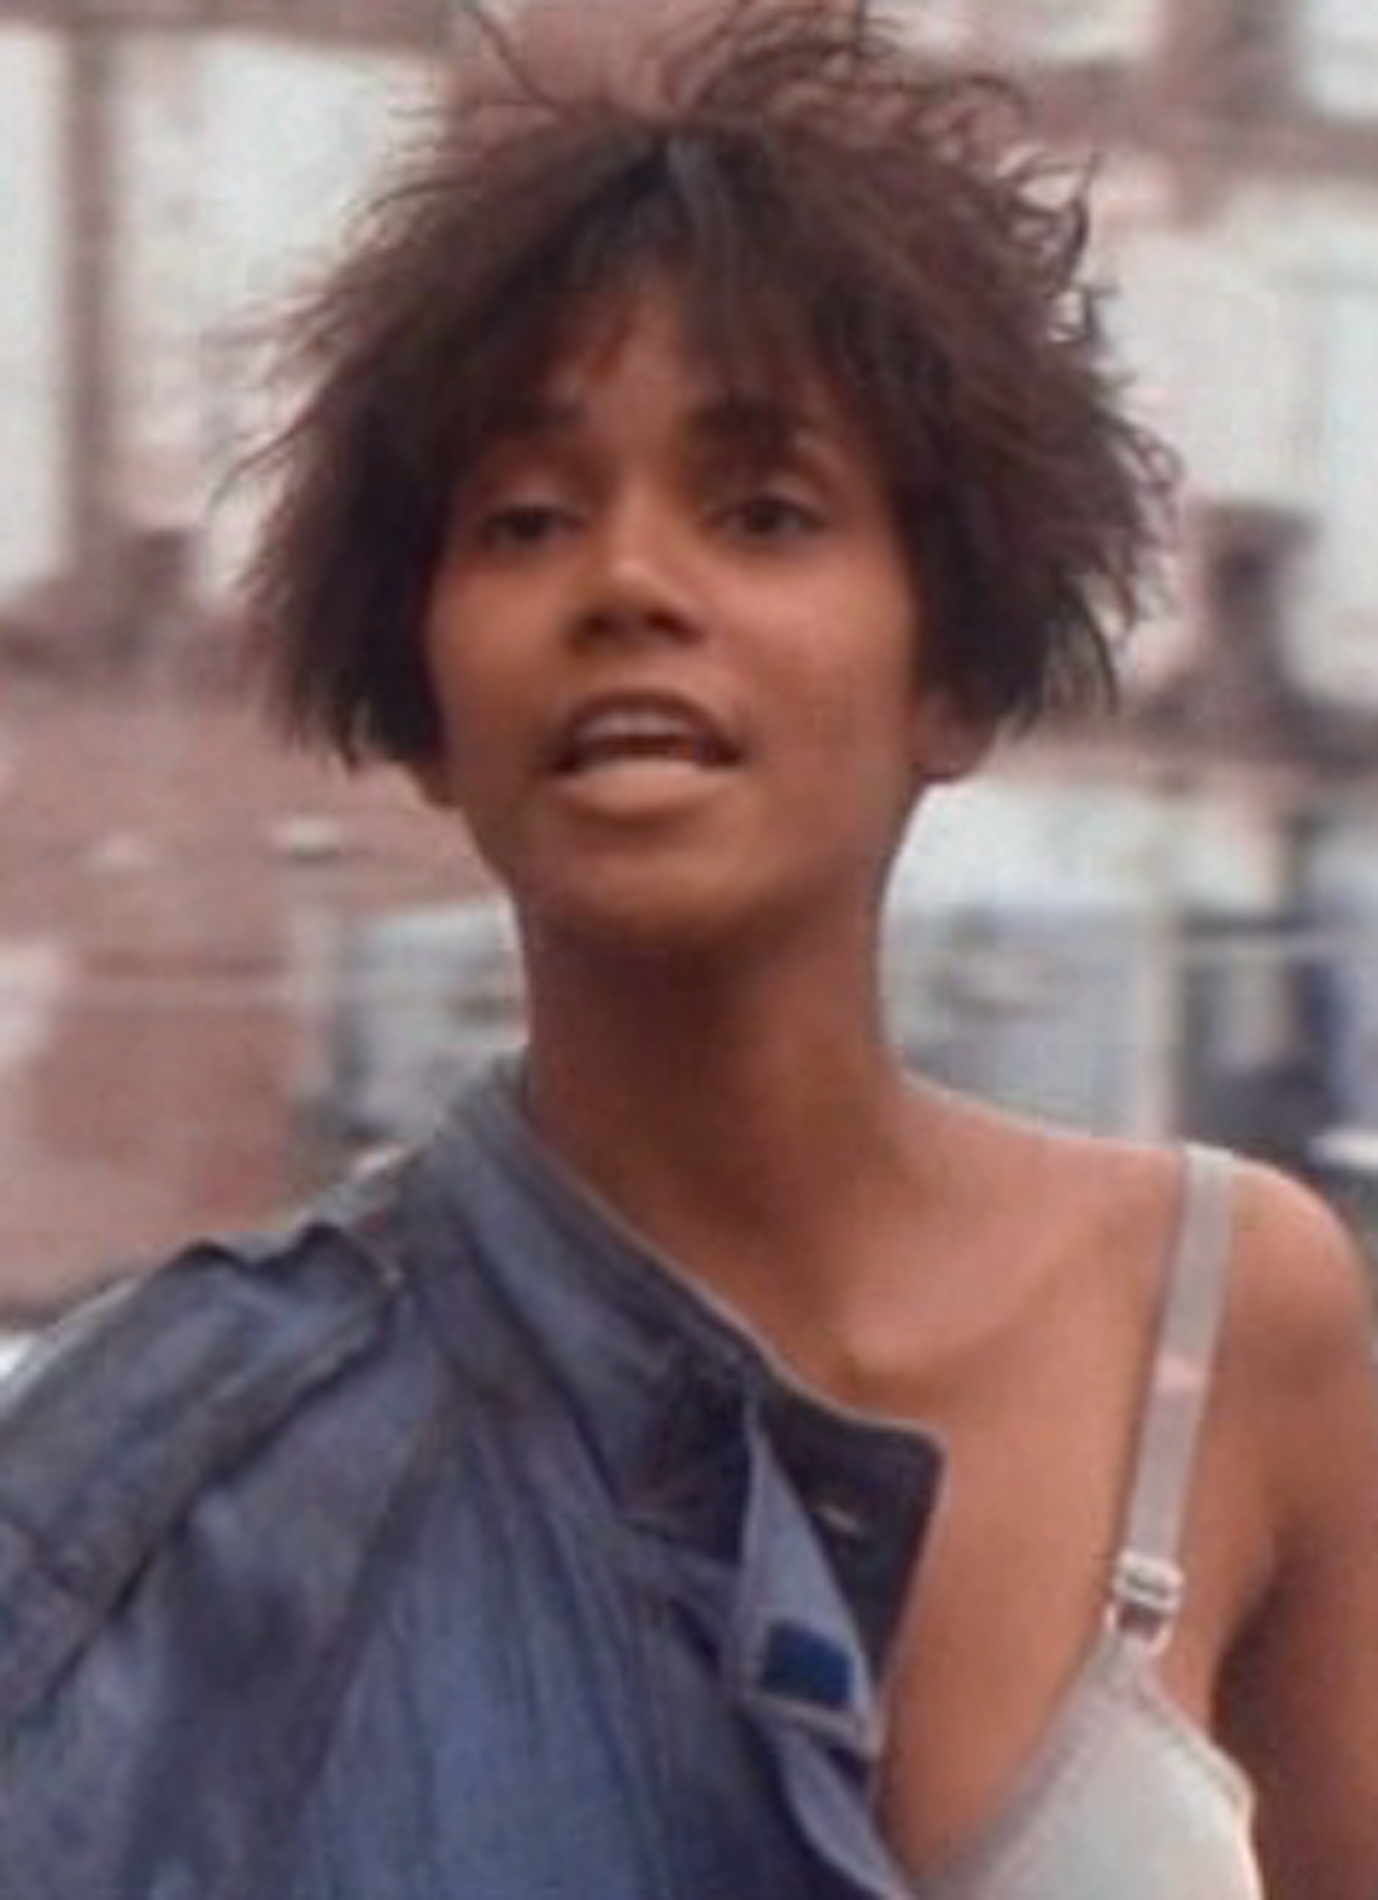 Halle Berry with messy hair while wearing a bra and a jacket on her shoulder